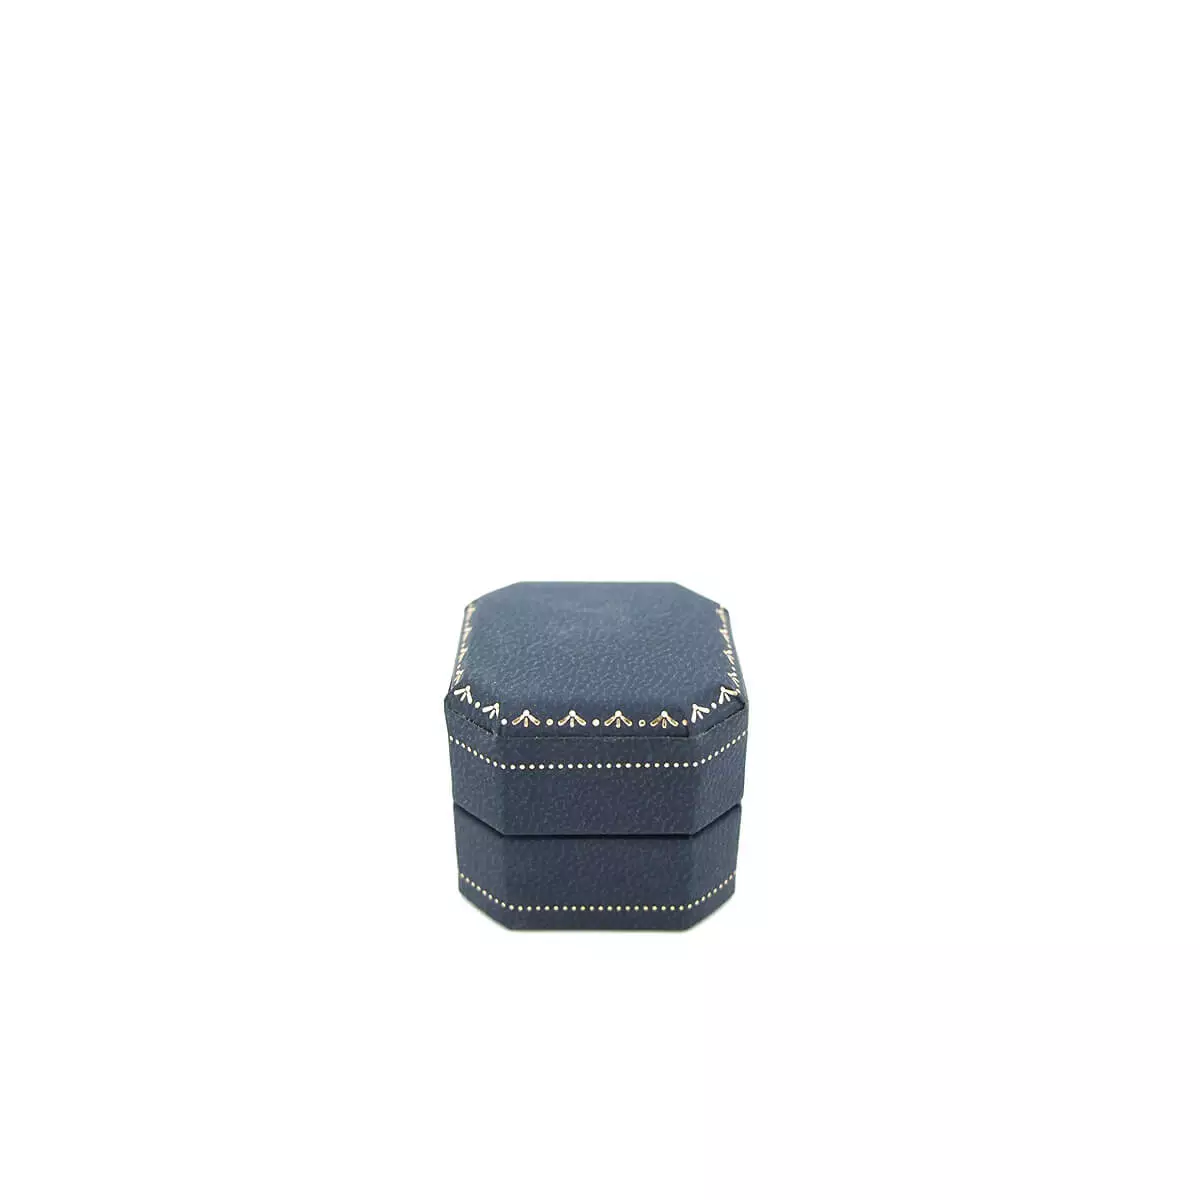 kaia ring box in blue